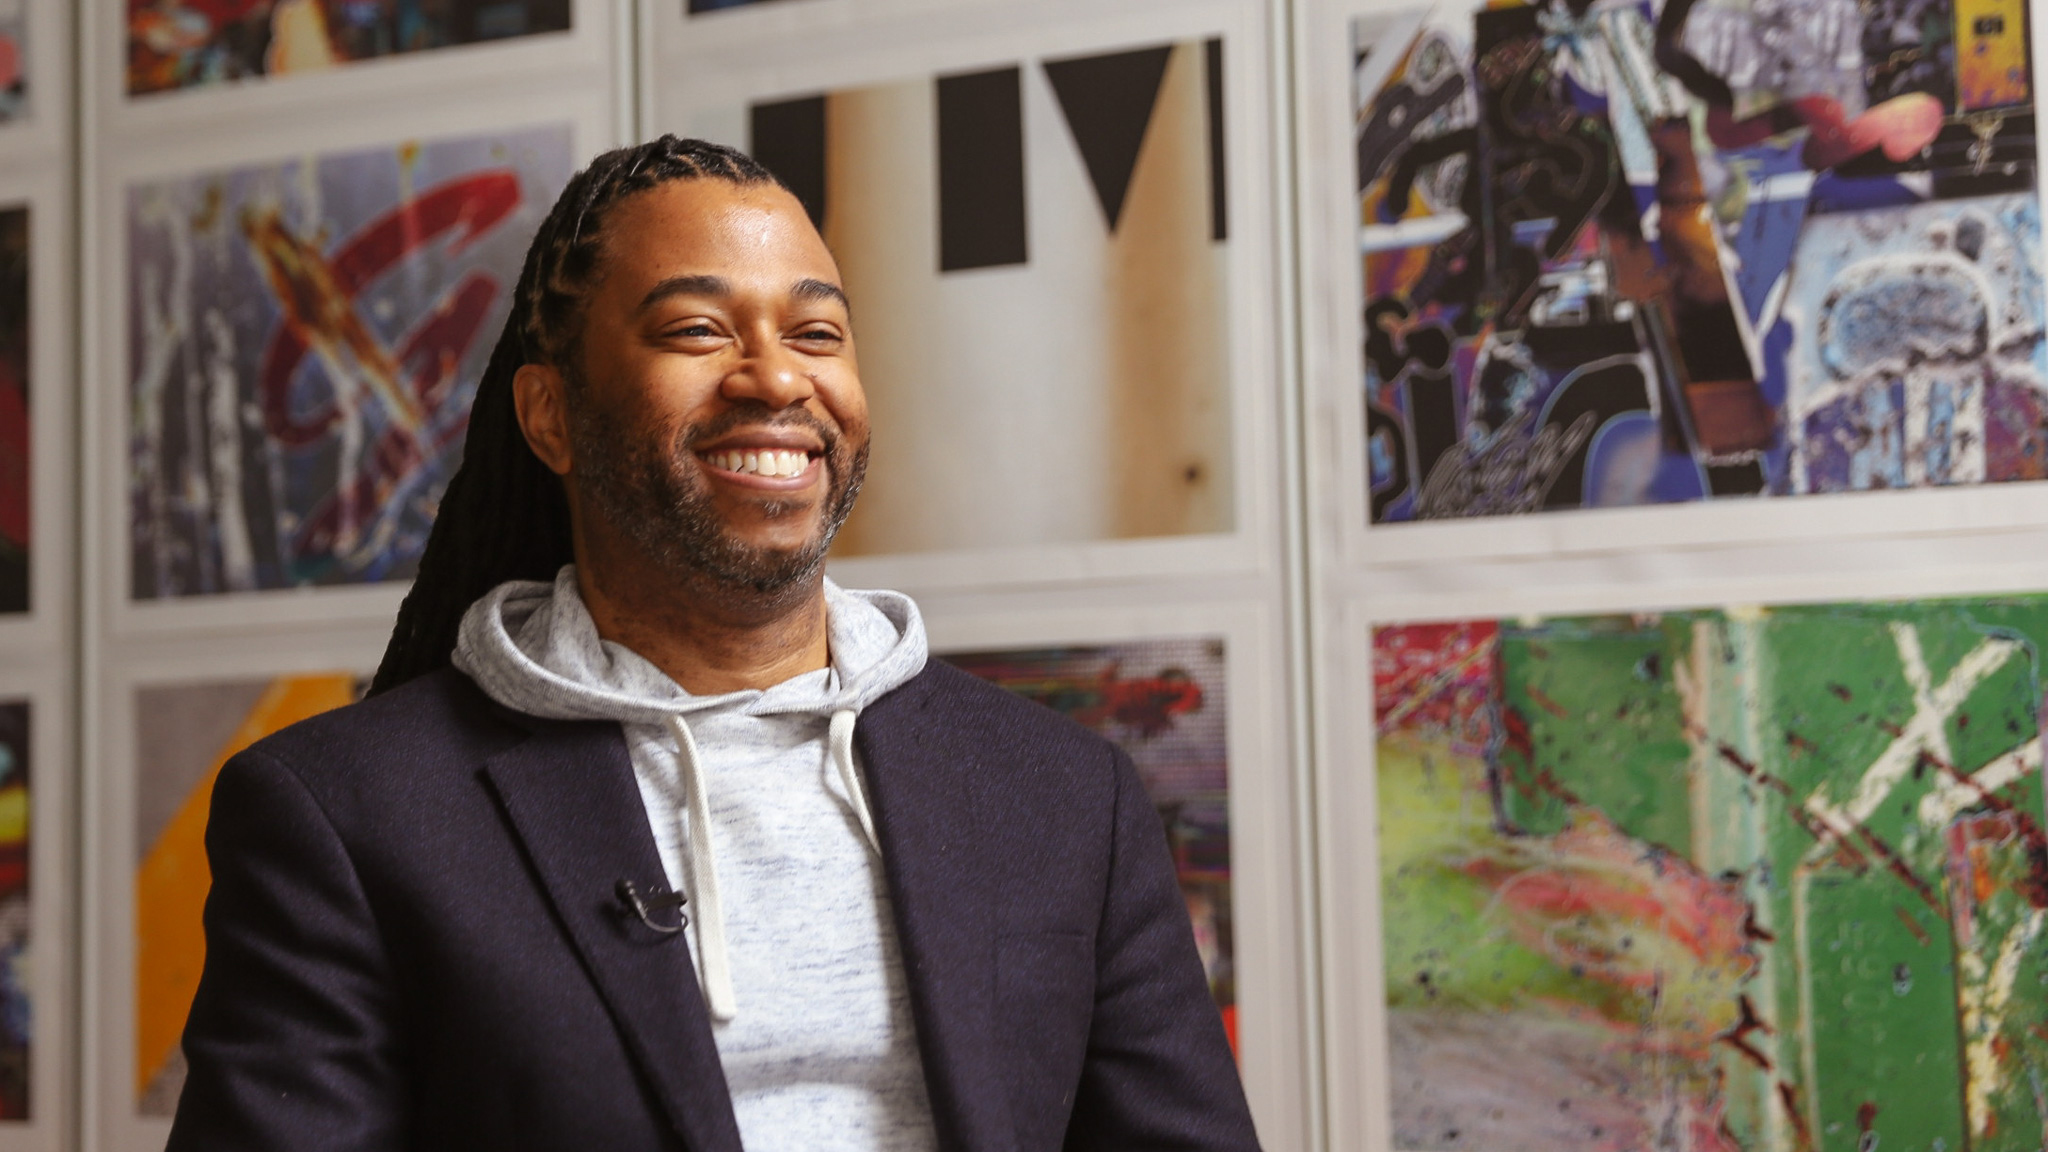 Terrence Burrell, interim chief creative officer at Burrell Communications, smiles during an interview with the roadtrippers.